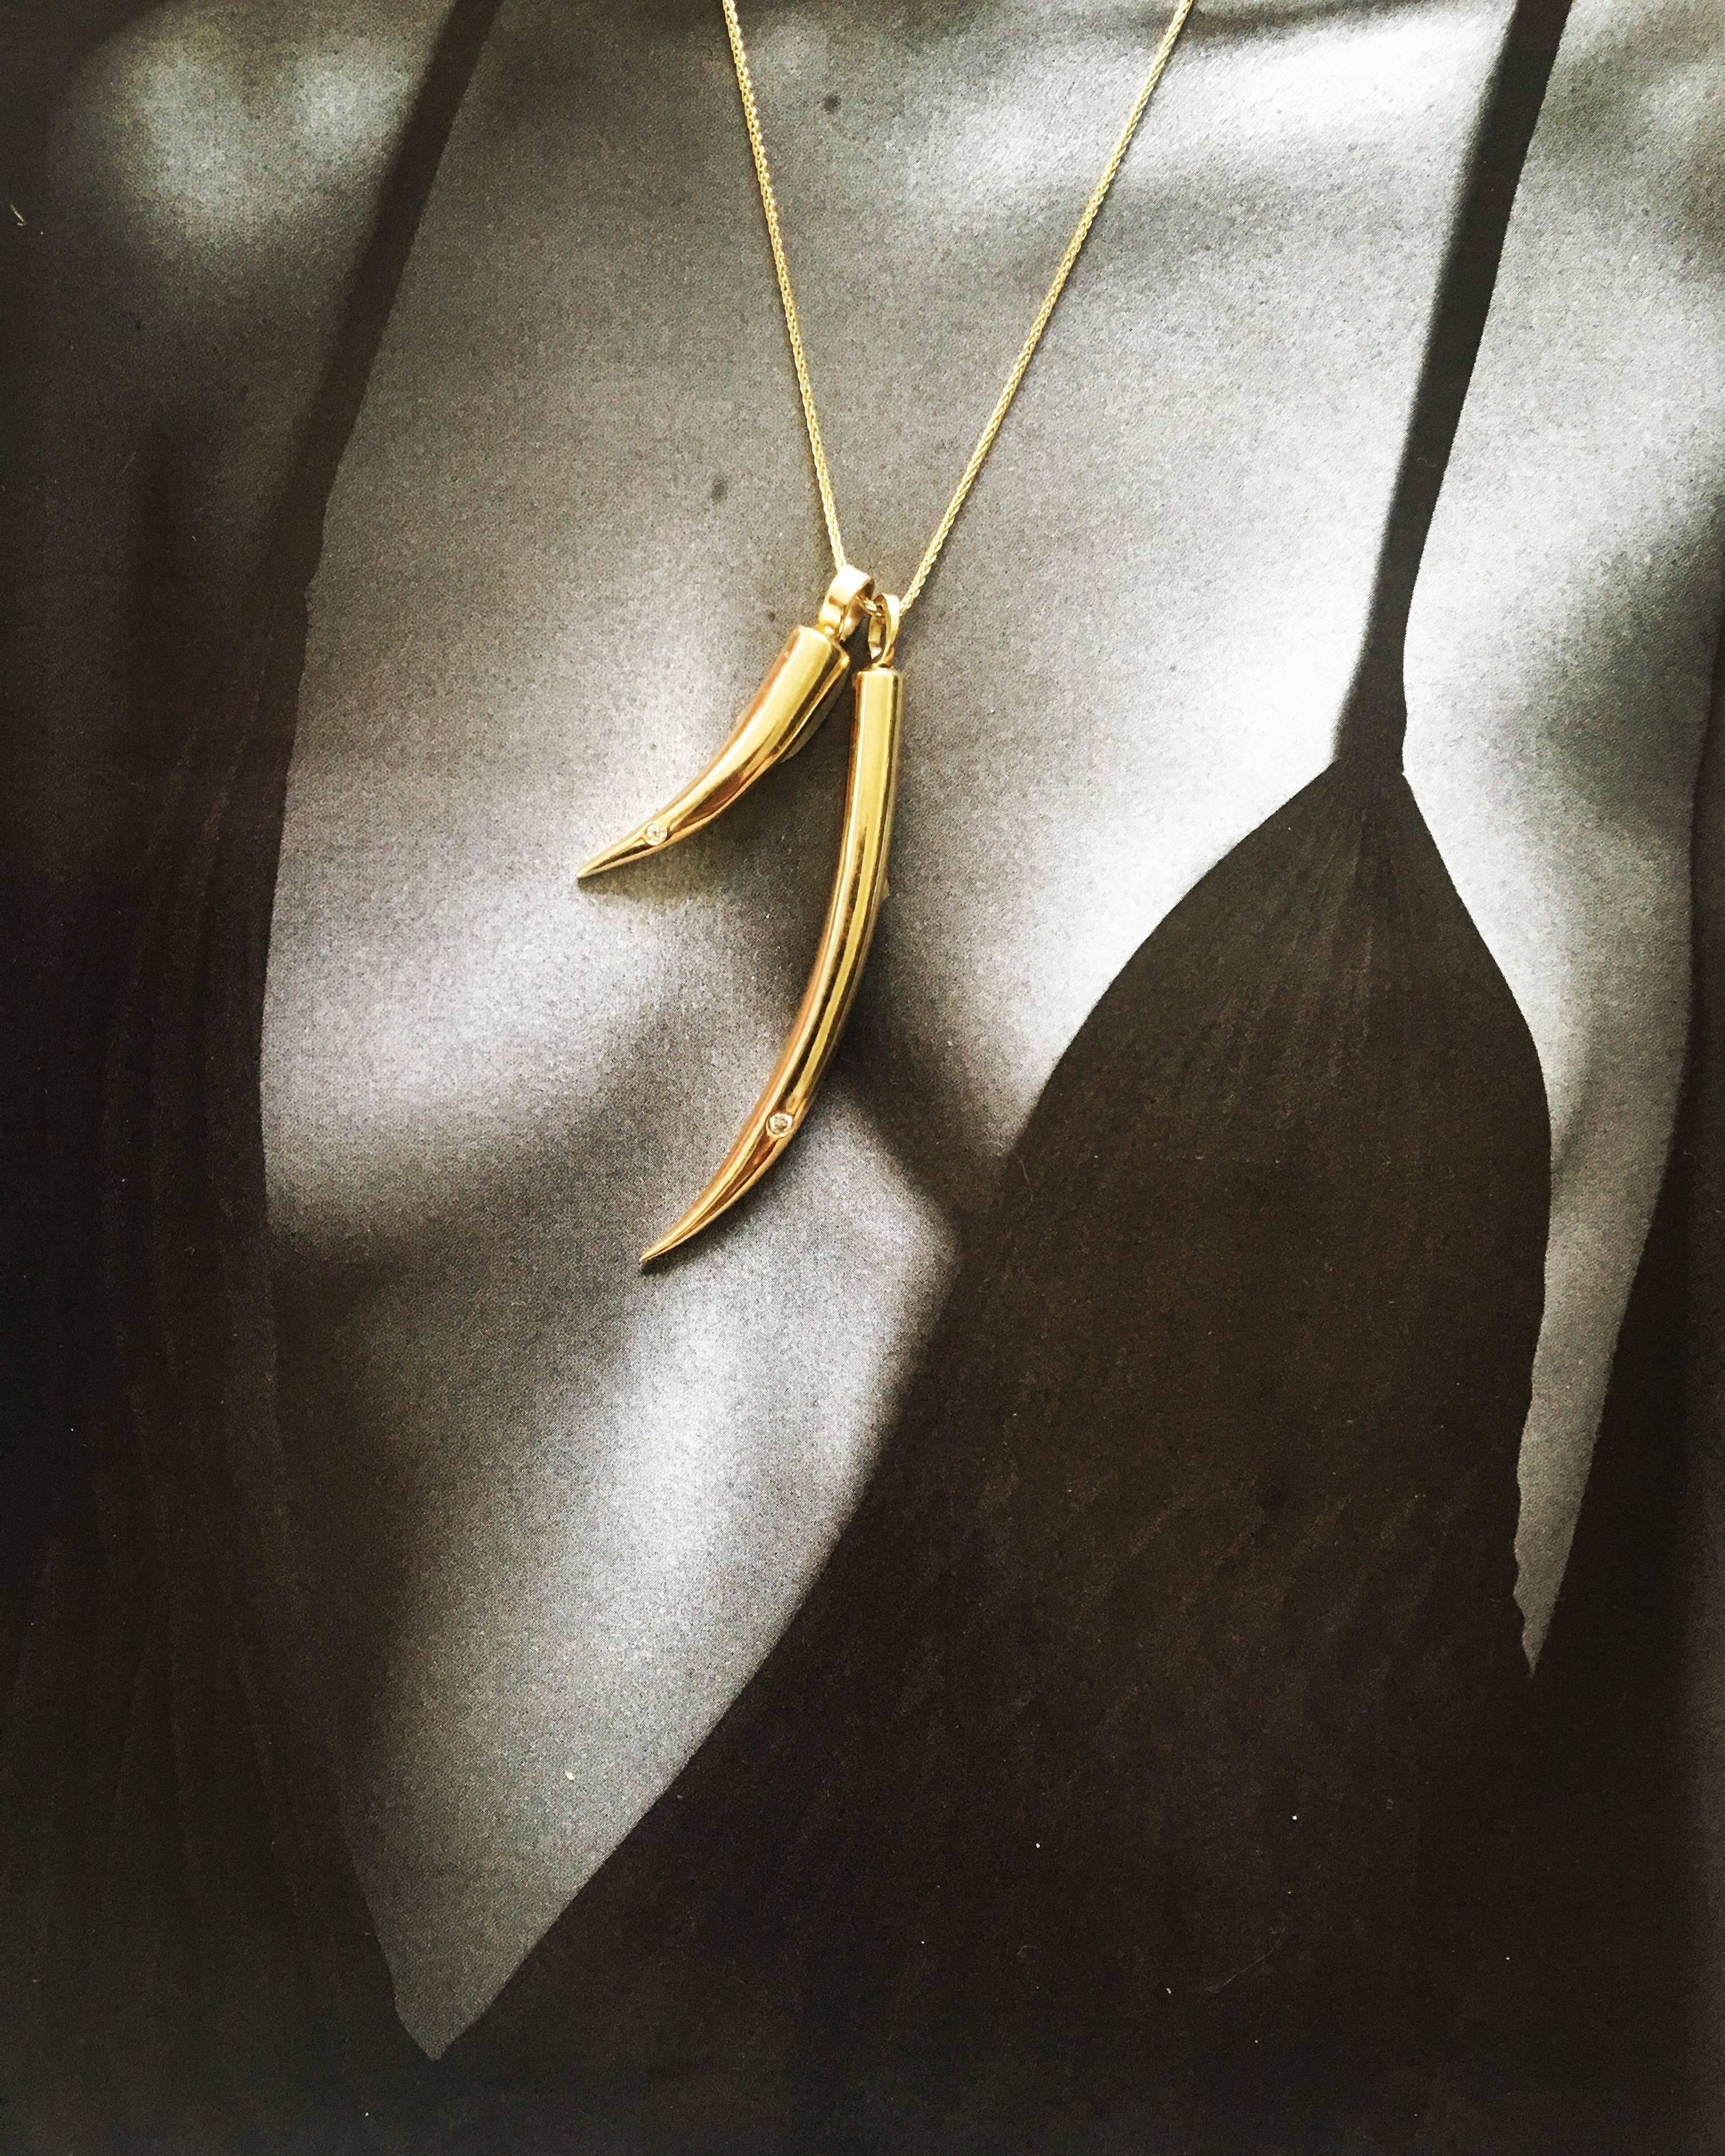 This large 14k gold tusk pendant has a sleek and sexy design meant to be worn long and solo, but equally alluring layered with other pendants.  It has a diamond set at the tip of the tusk to showcase the femininity of the piece.

The Large Tusk